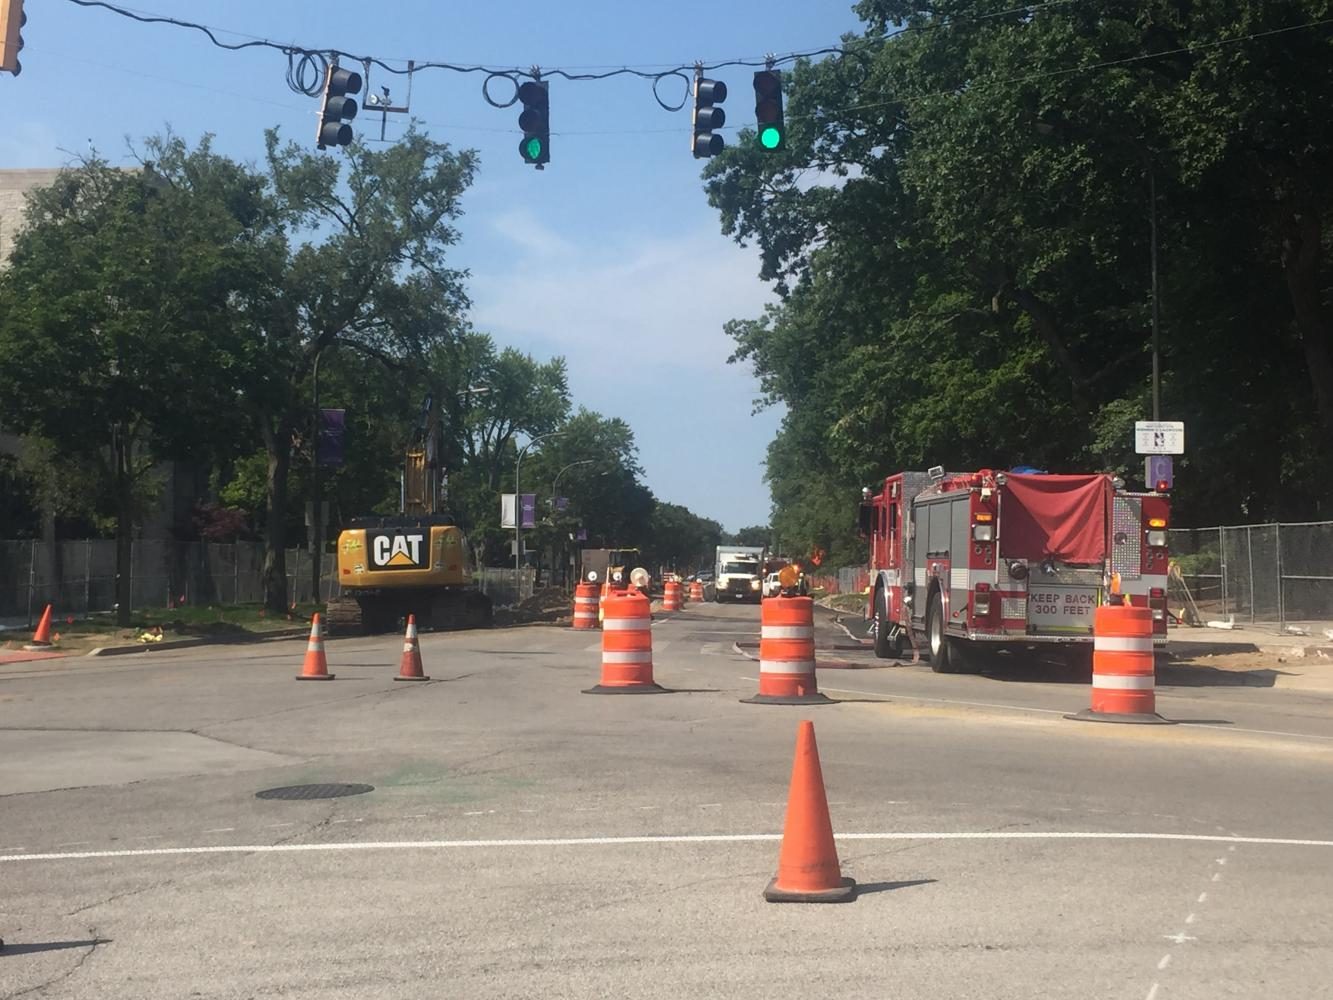 Construction workers and Evanston officers have blocked off the intersection of Sheridan Road and Chicago Avenue due to a gas main breach. No one has been injured.